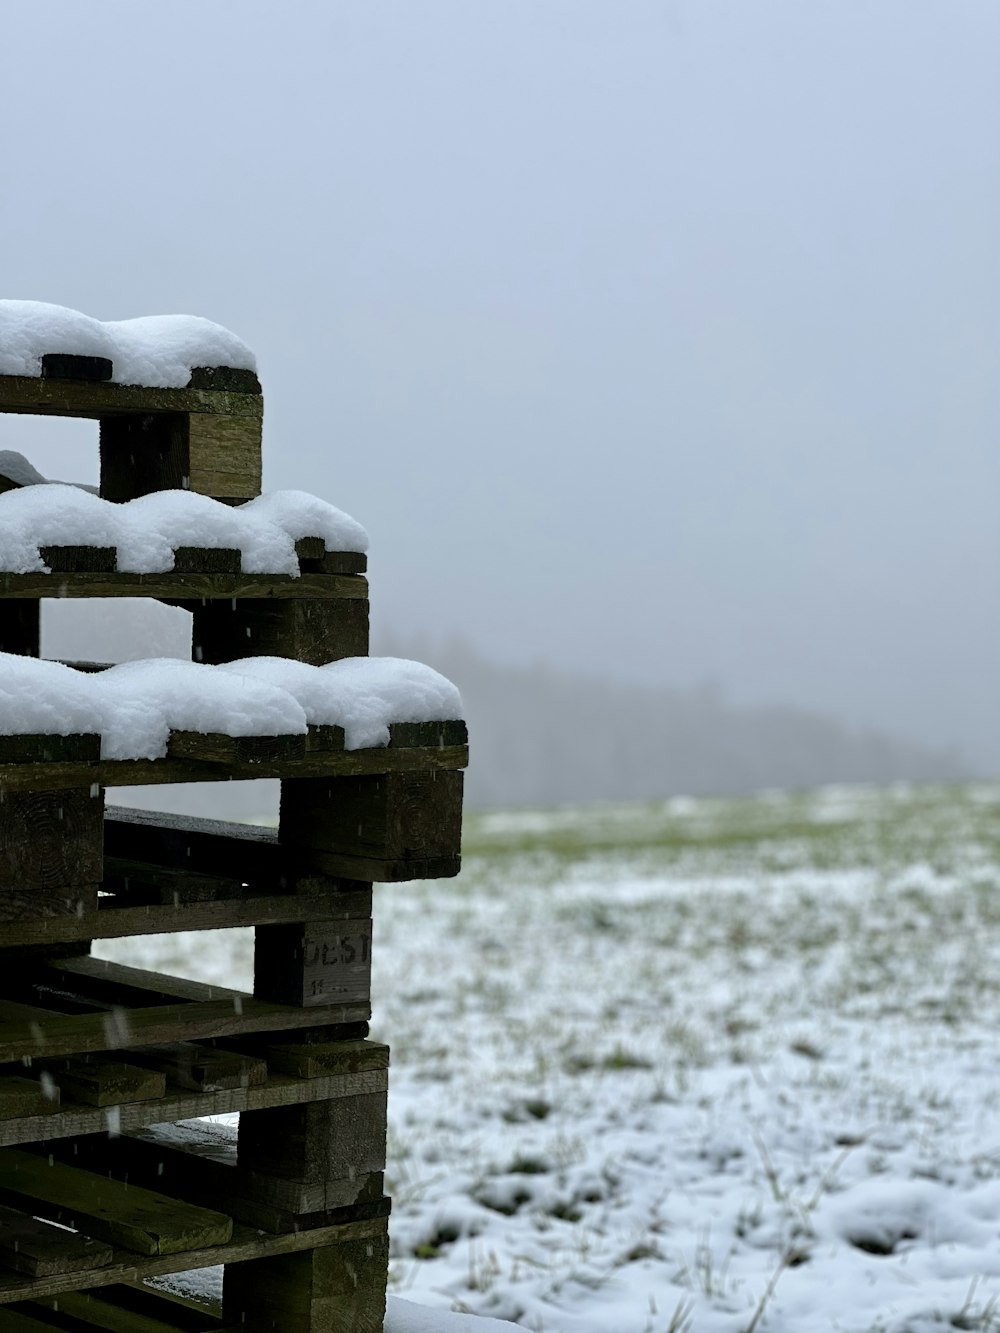 a pile of wooden crates covered in snow